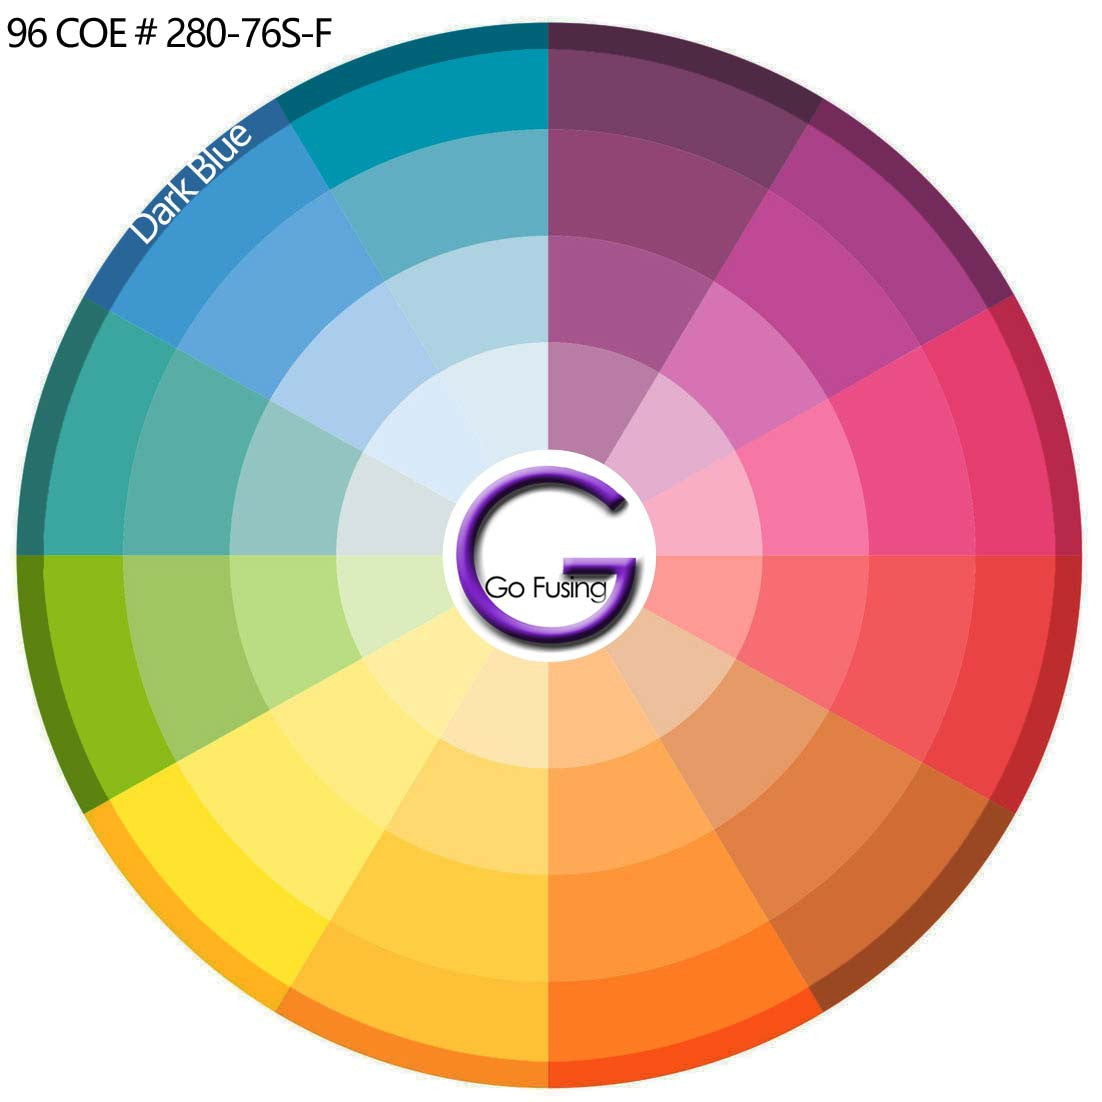 96 COE fusible Dark Blue Opal Sheet Glass on a Color Wheel to display Complimentary and Contrasting colors, 280-76S-F